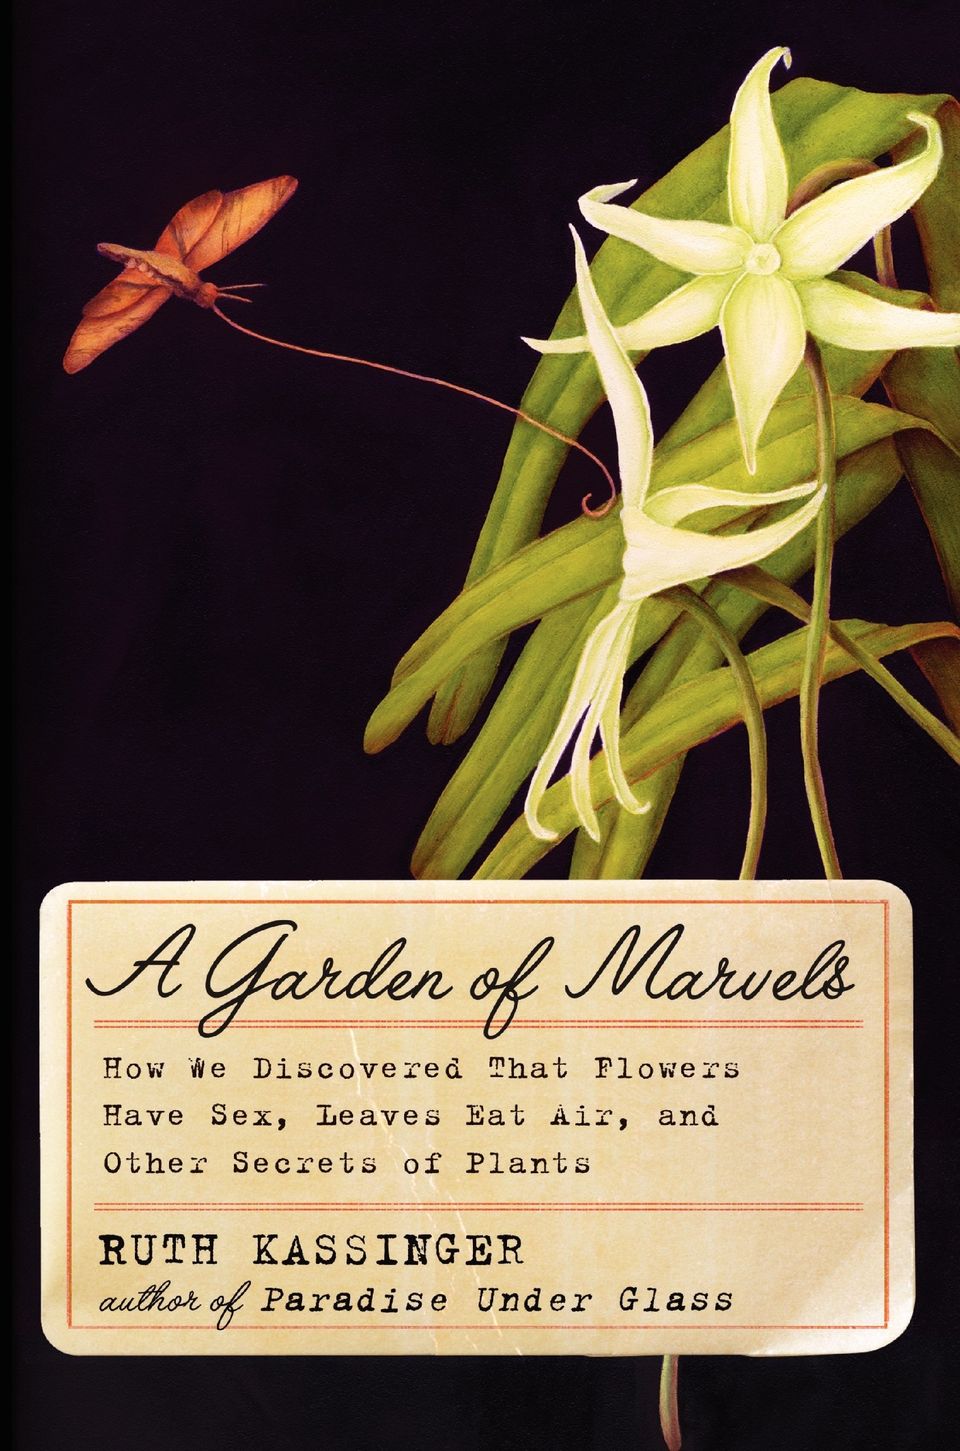 'A GARDEN OF MARVELS: THE DISCOVERY THAT FLOWERS HAVE SEX, LEAVES EAT AIR, AND OTHER SECRETS OF PLANTS' by Ruth Kassinger